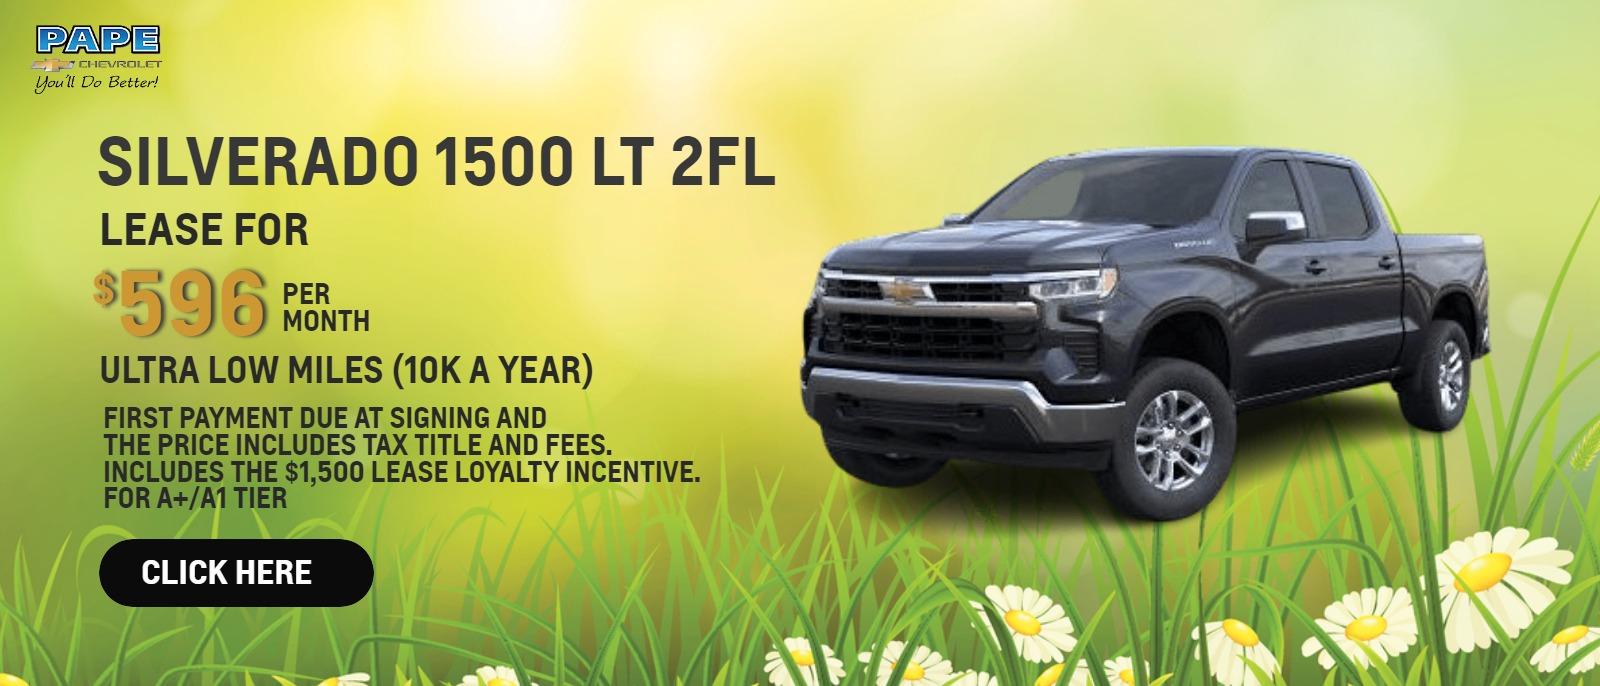 Silverado 1500 LT 2FL". "Lease at $596.00 a month for 36 months". Ultra low miles (10k a year)
First payment due at signing and the price includes tax title and fees. "